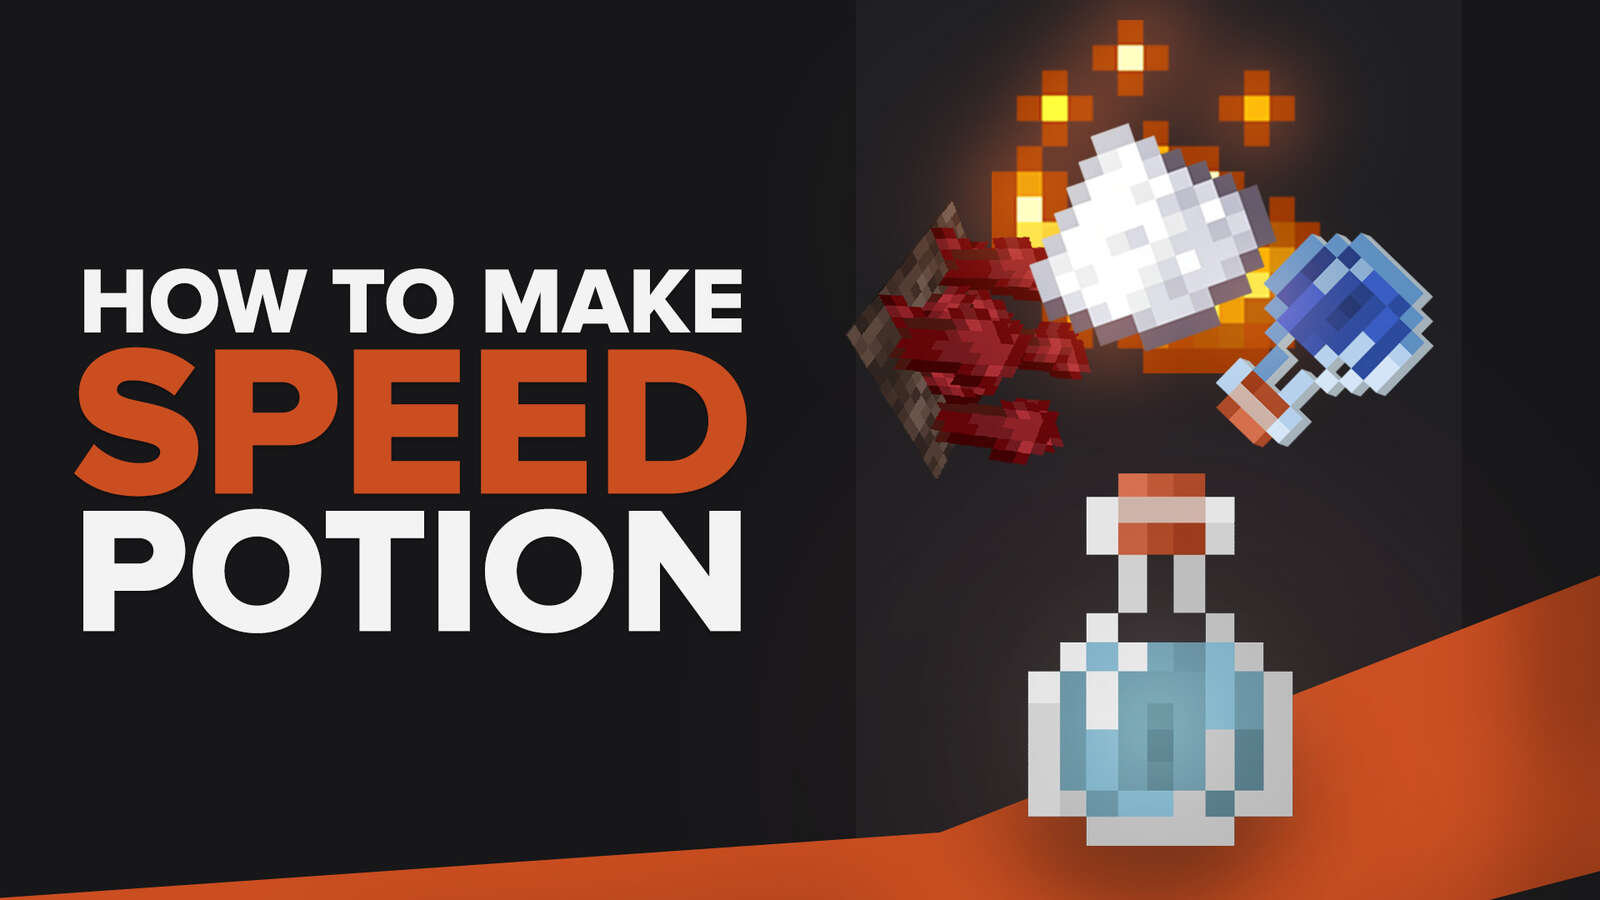 How To Make A Speed Potion In Minecraft: A Step-By-Step Guide